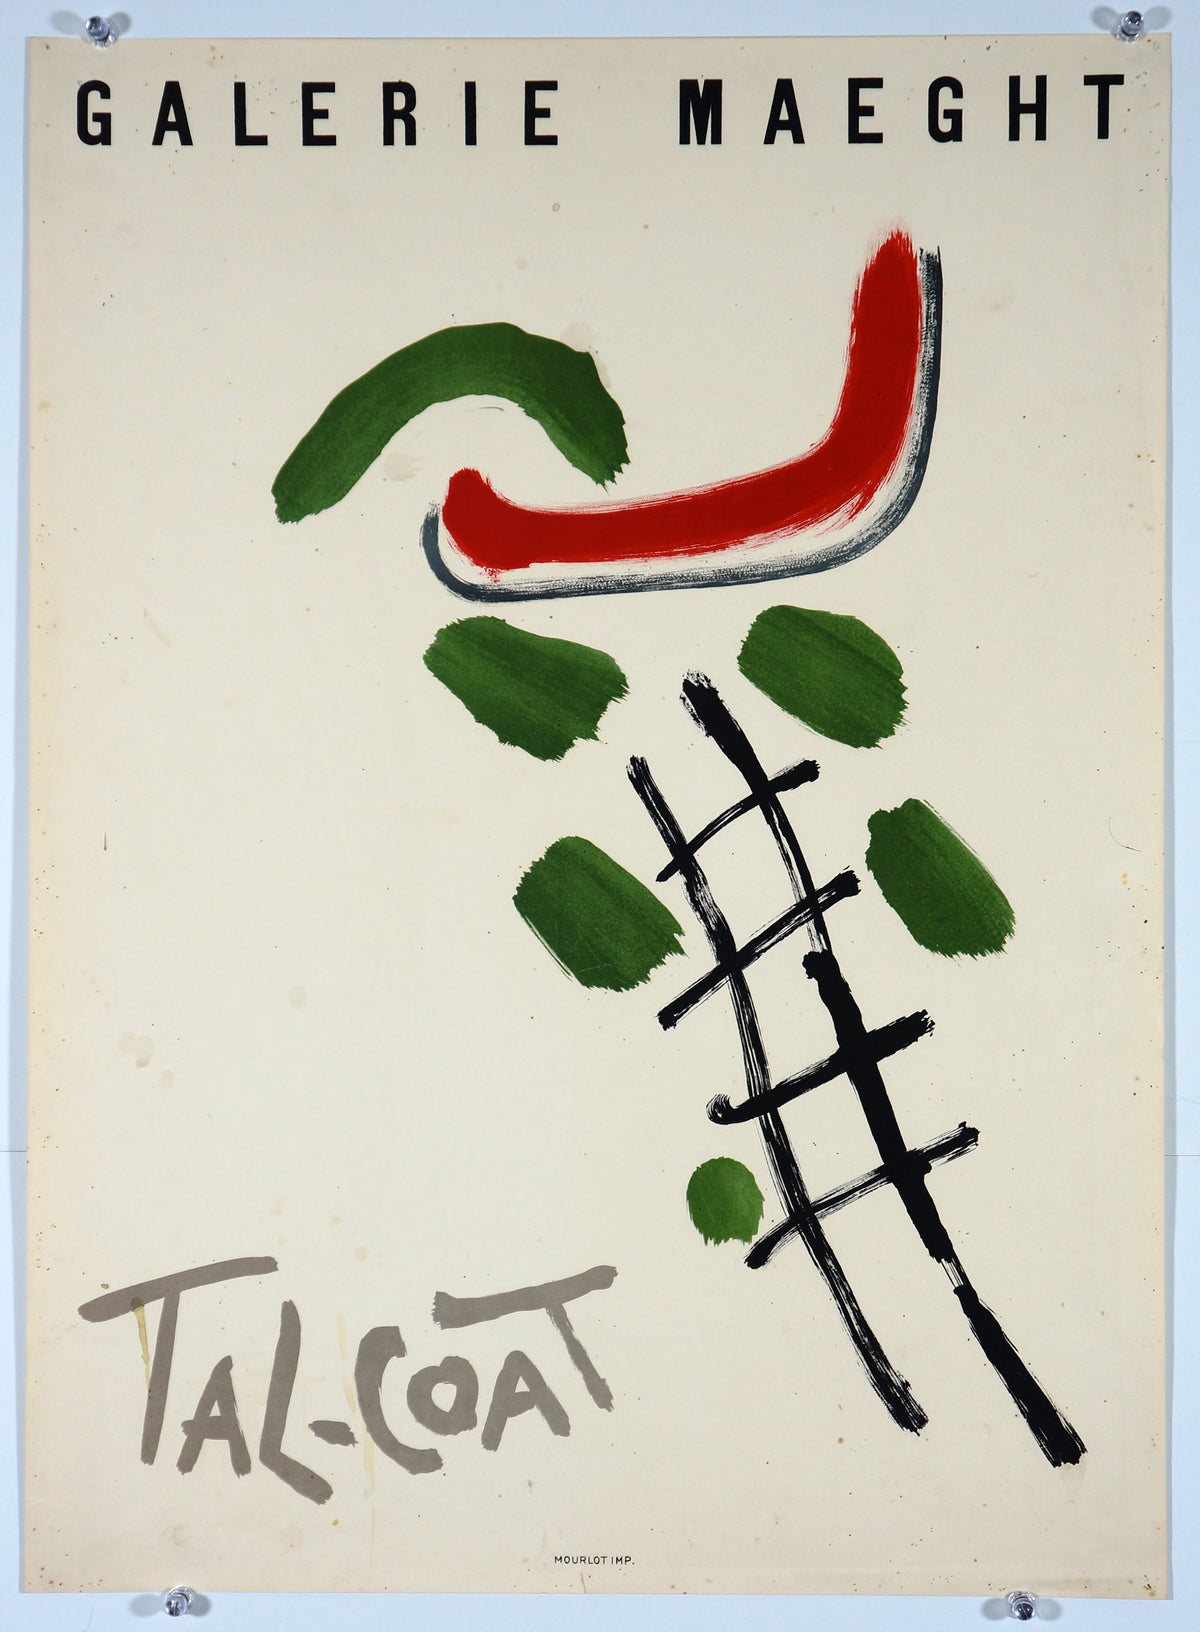 Tal-Coat Exhibition- Galerie Maeght - Authentic Vintage Poster